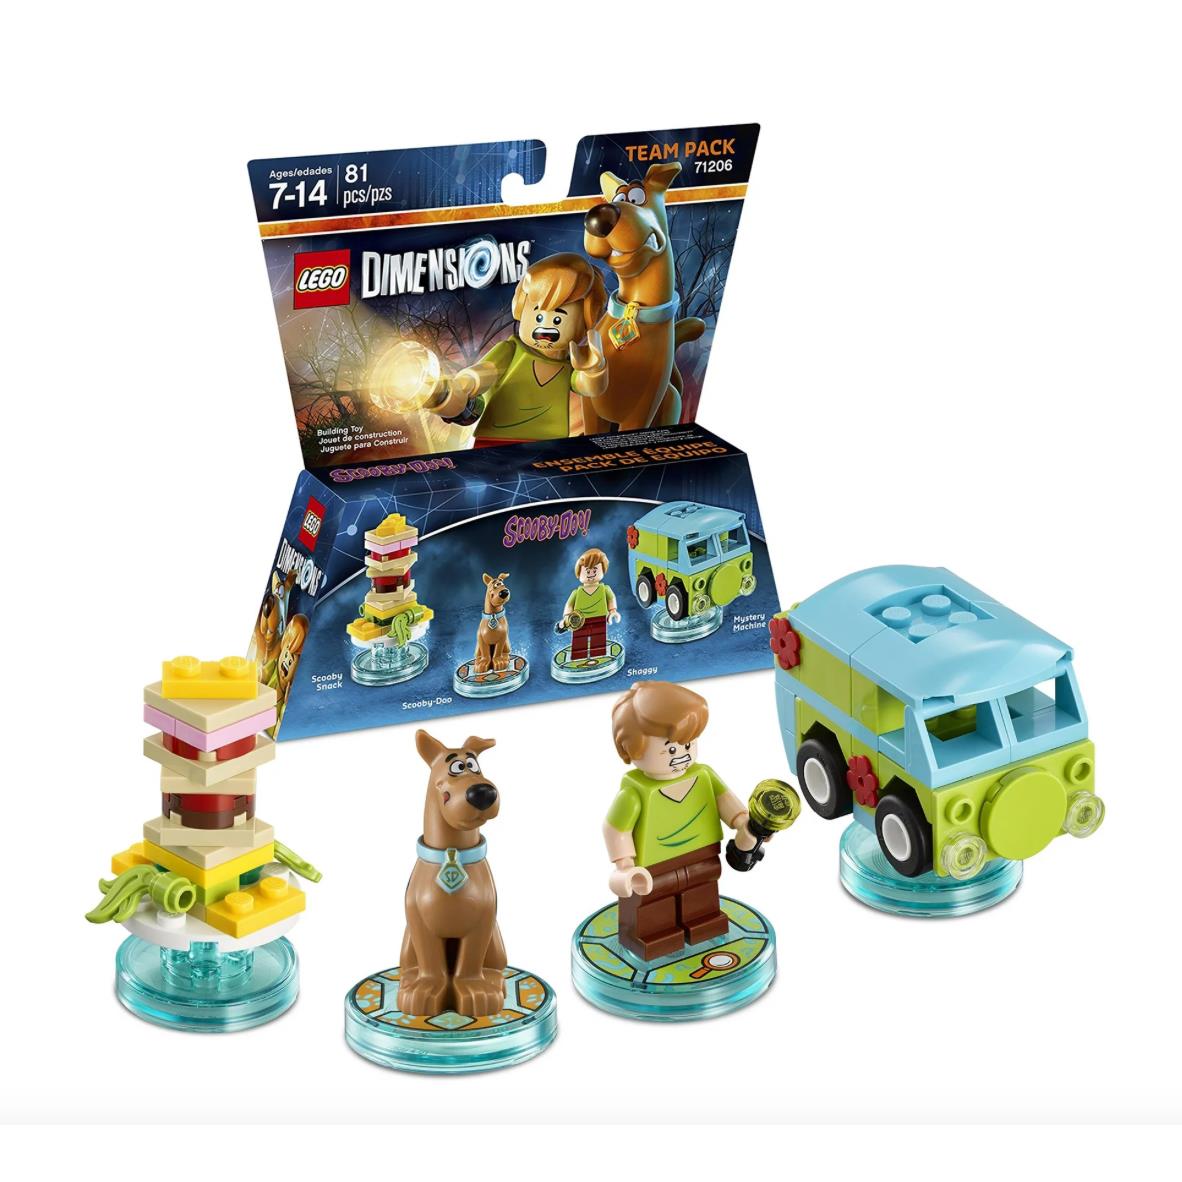 Lego Dimensions Scooby-doo Team Pack 71206 Shaggy Mystery Machine Scooby Snack